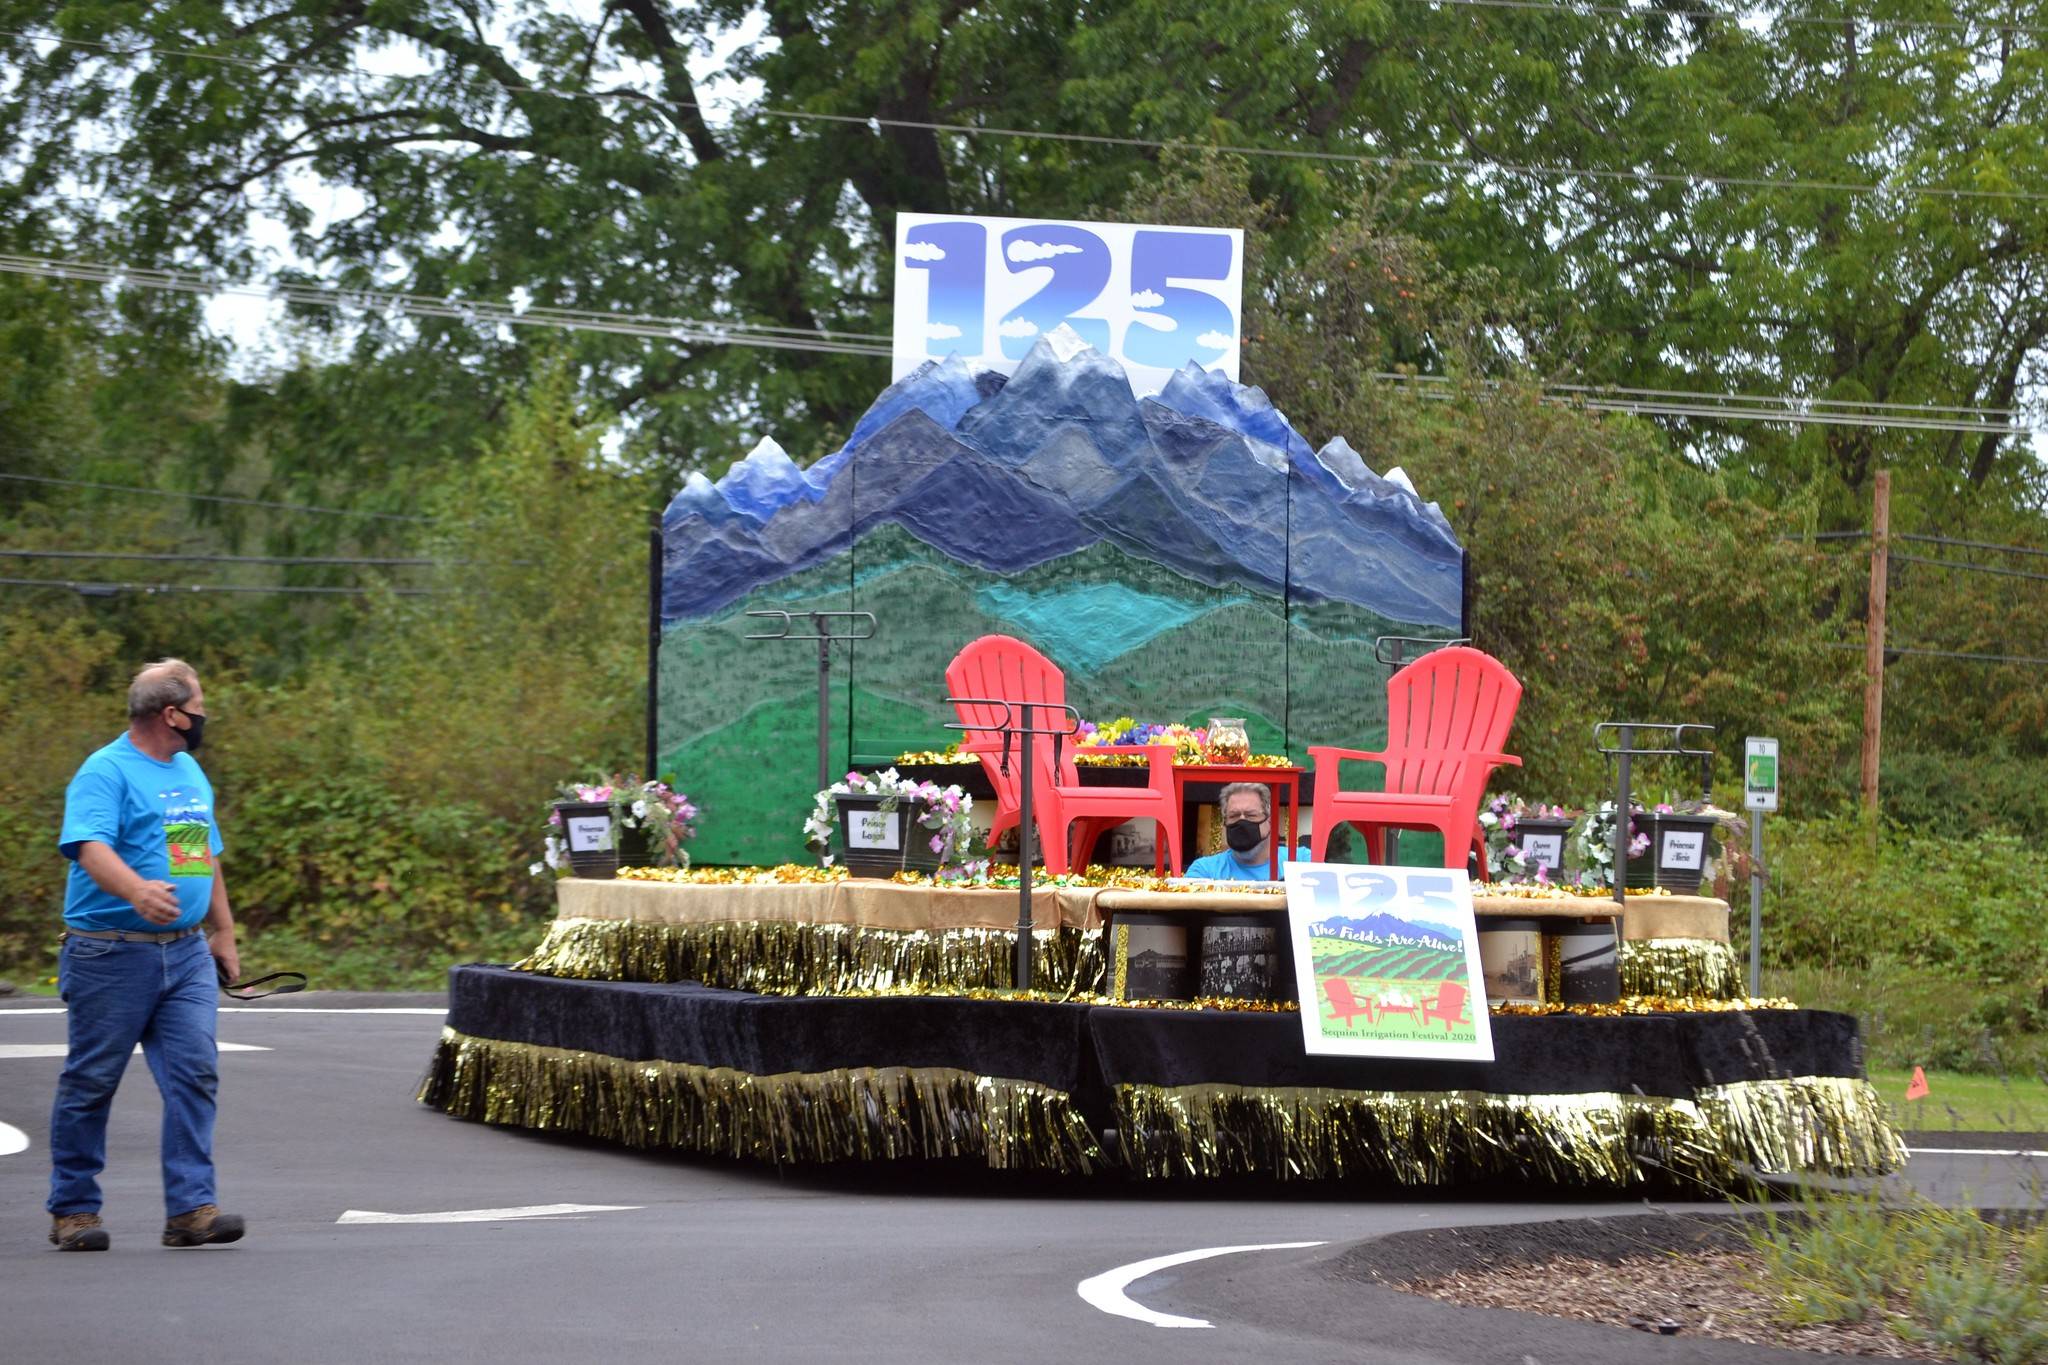 Locals can view the 2021 Sequim Irrigation Festival royalty float reveal at 4:45 p.m. Saturday, April 3 from the festival’s website <a href="http://www.irrigationfestival.com" target="_blank">www.irrigationfestival.com</a>. Last year’s float, pictured here, was only used for the 2020 Kickoff Dinner and Grand Parade/Procession due to the pandemic. Sequim Gazette file photo by Matthew Nash